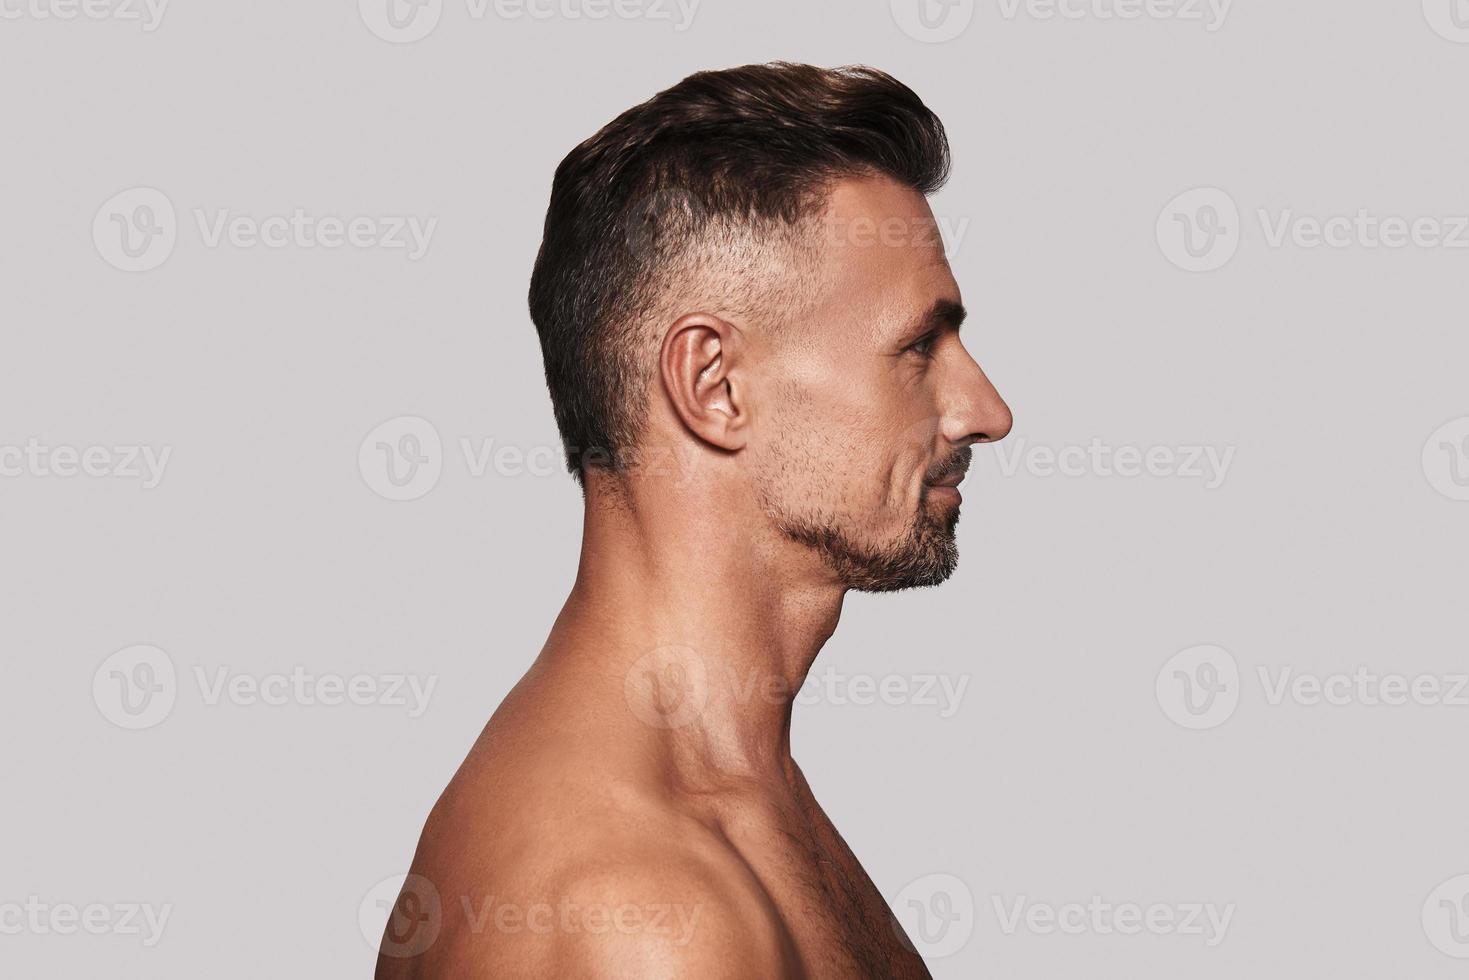 Shirtless man. Side view of good looking young man smiling while standing against grey background photo